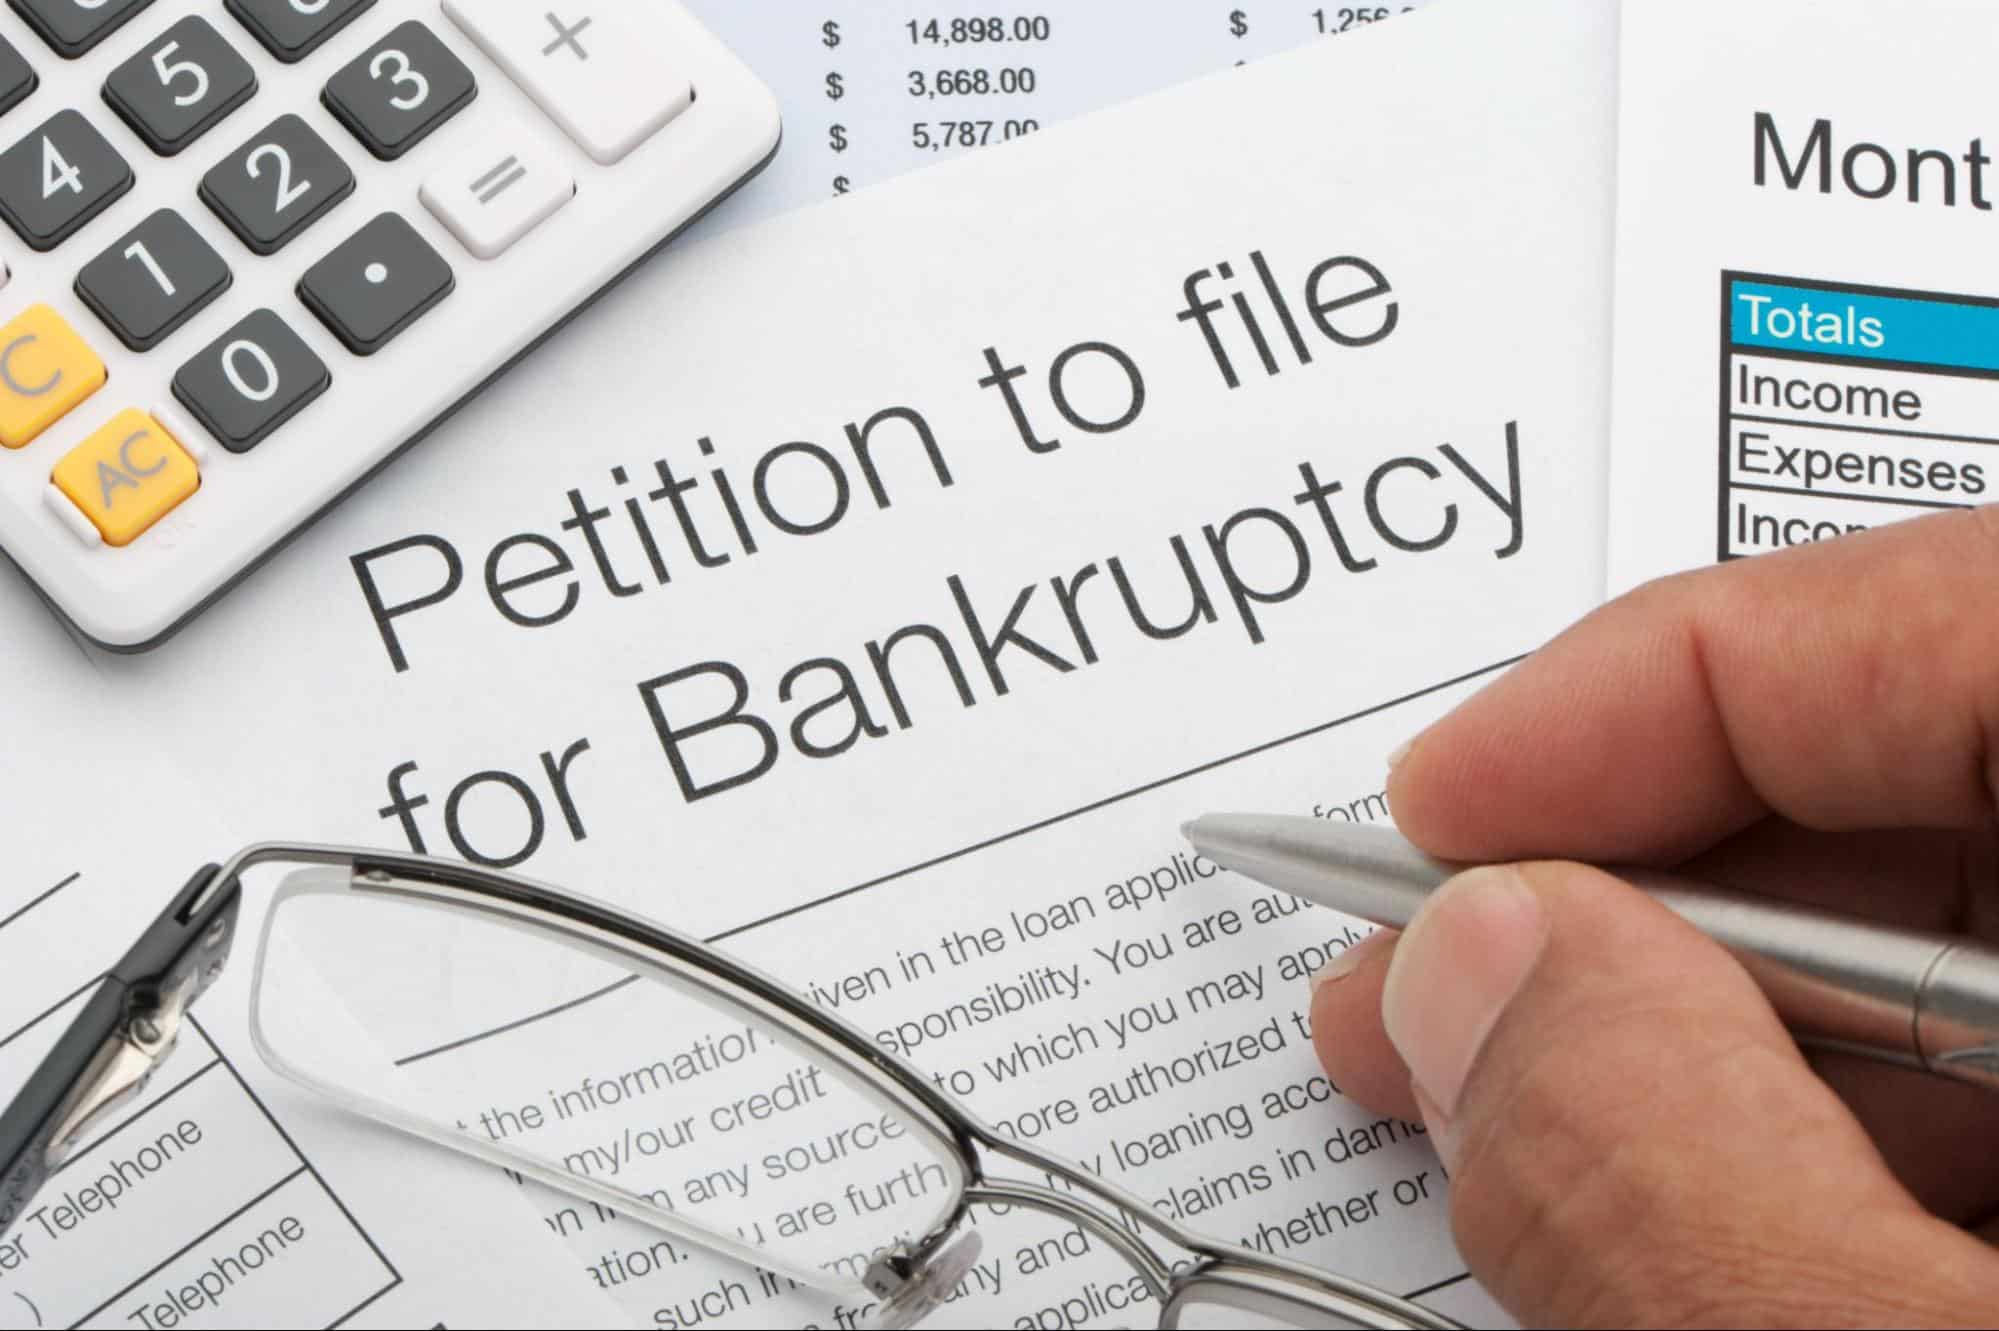 petition to file for bankruptcy paper